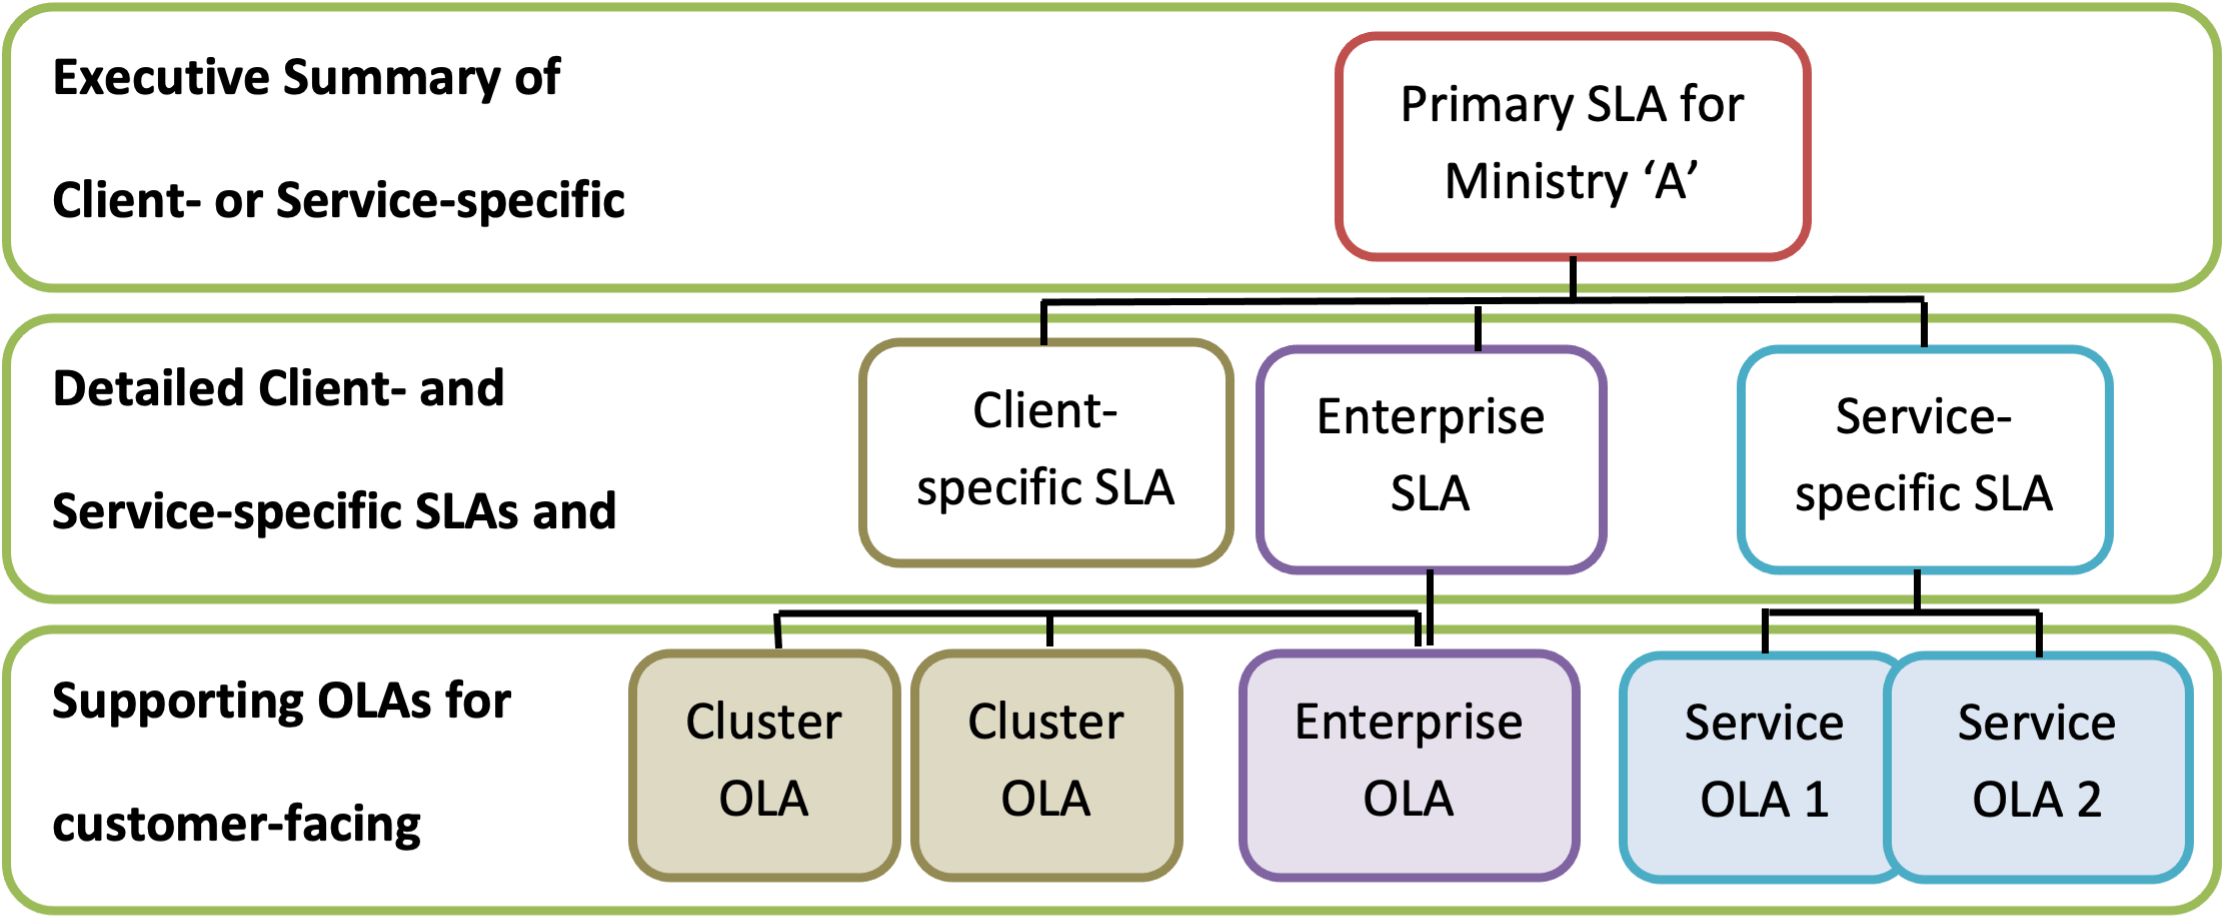 Visual representation of how the eSAM documents may be deployed in a multi-level SLA structure for a Ministry